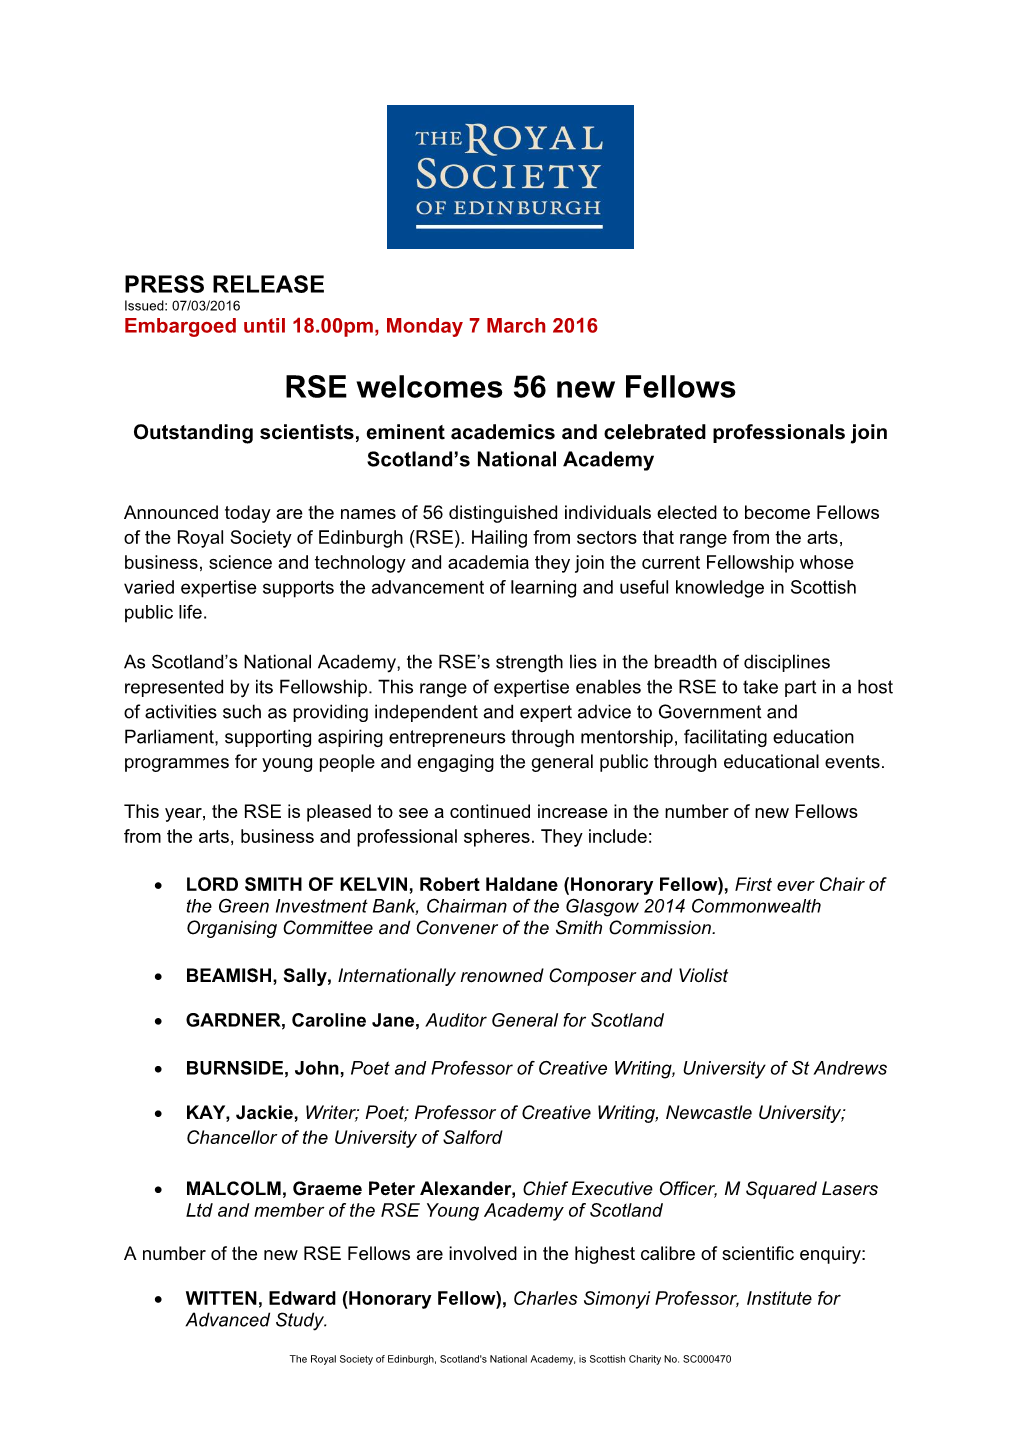 RSE Welcomes 56 New Fellows